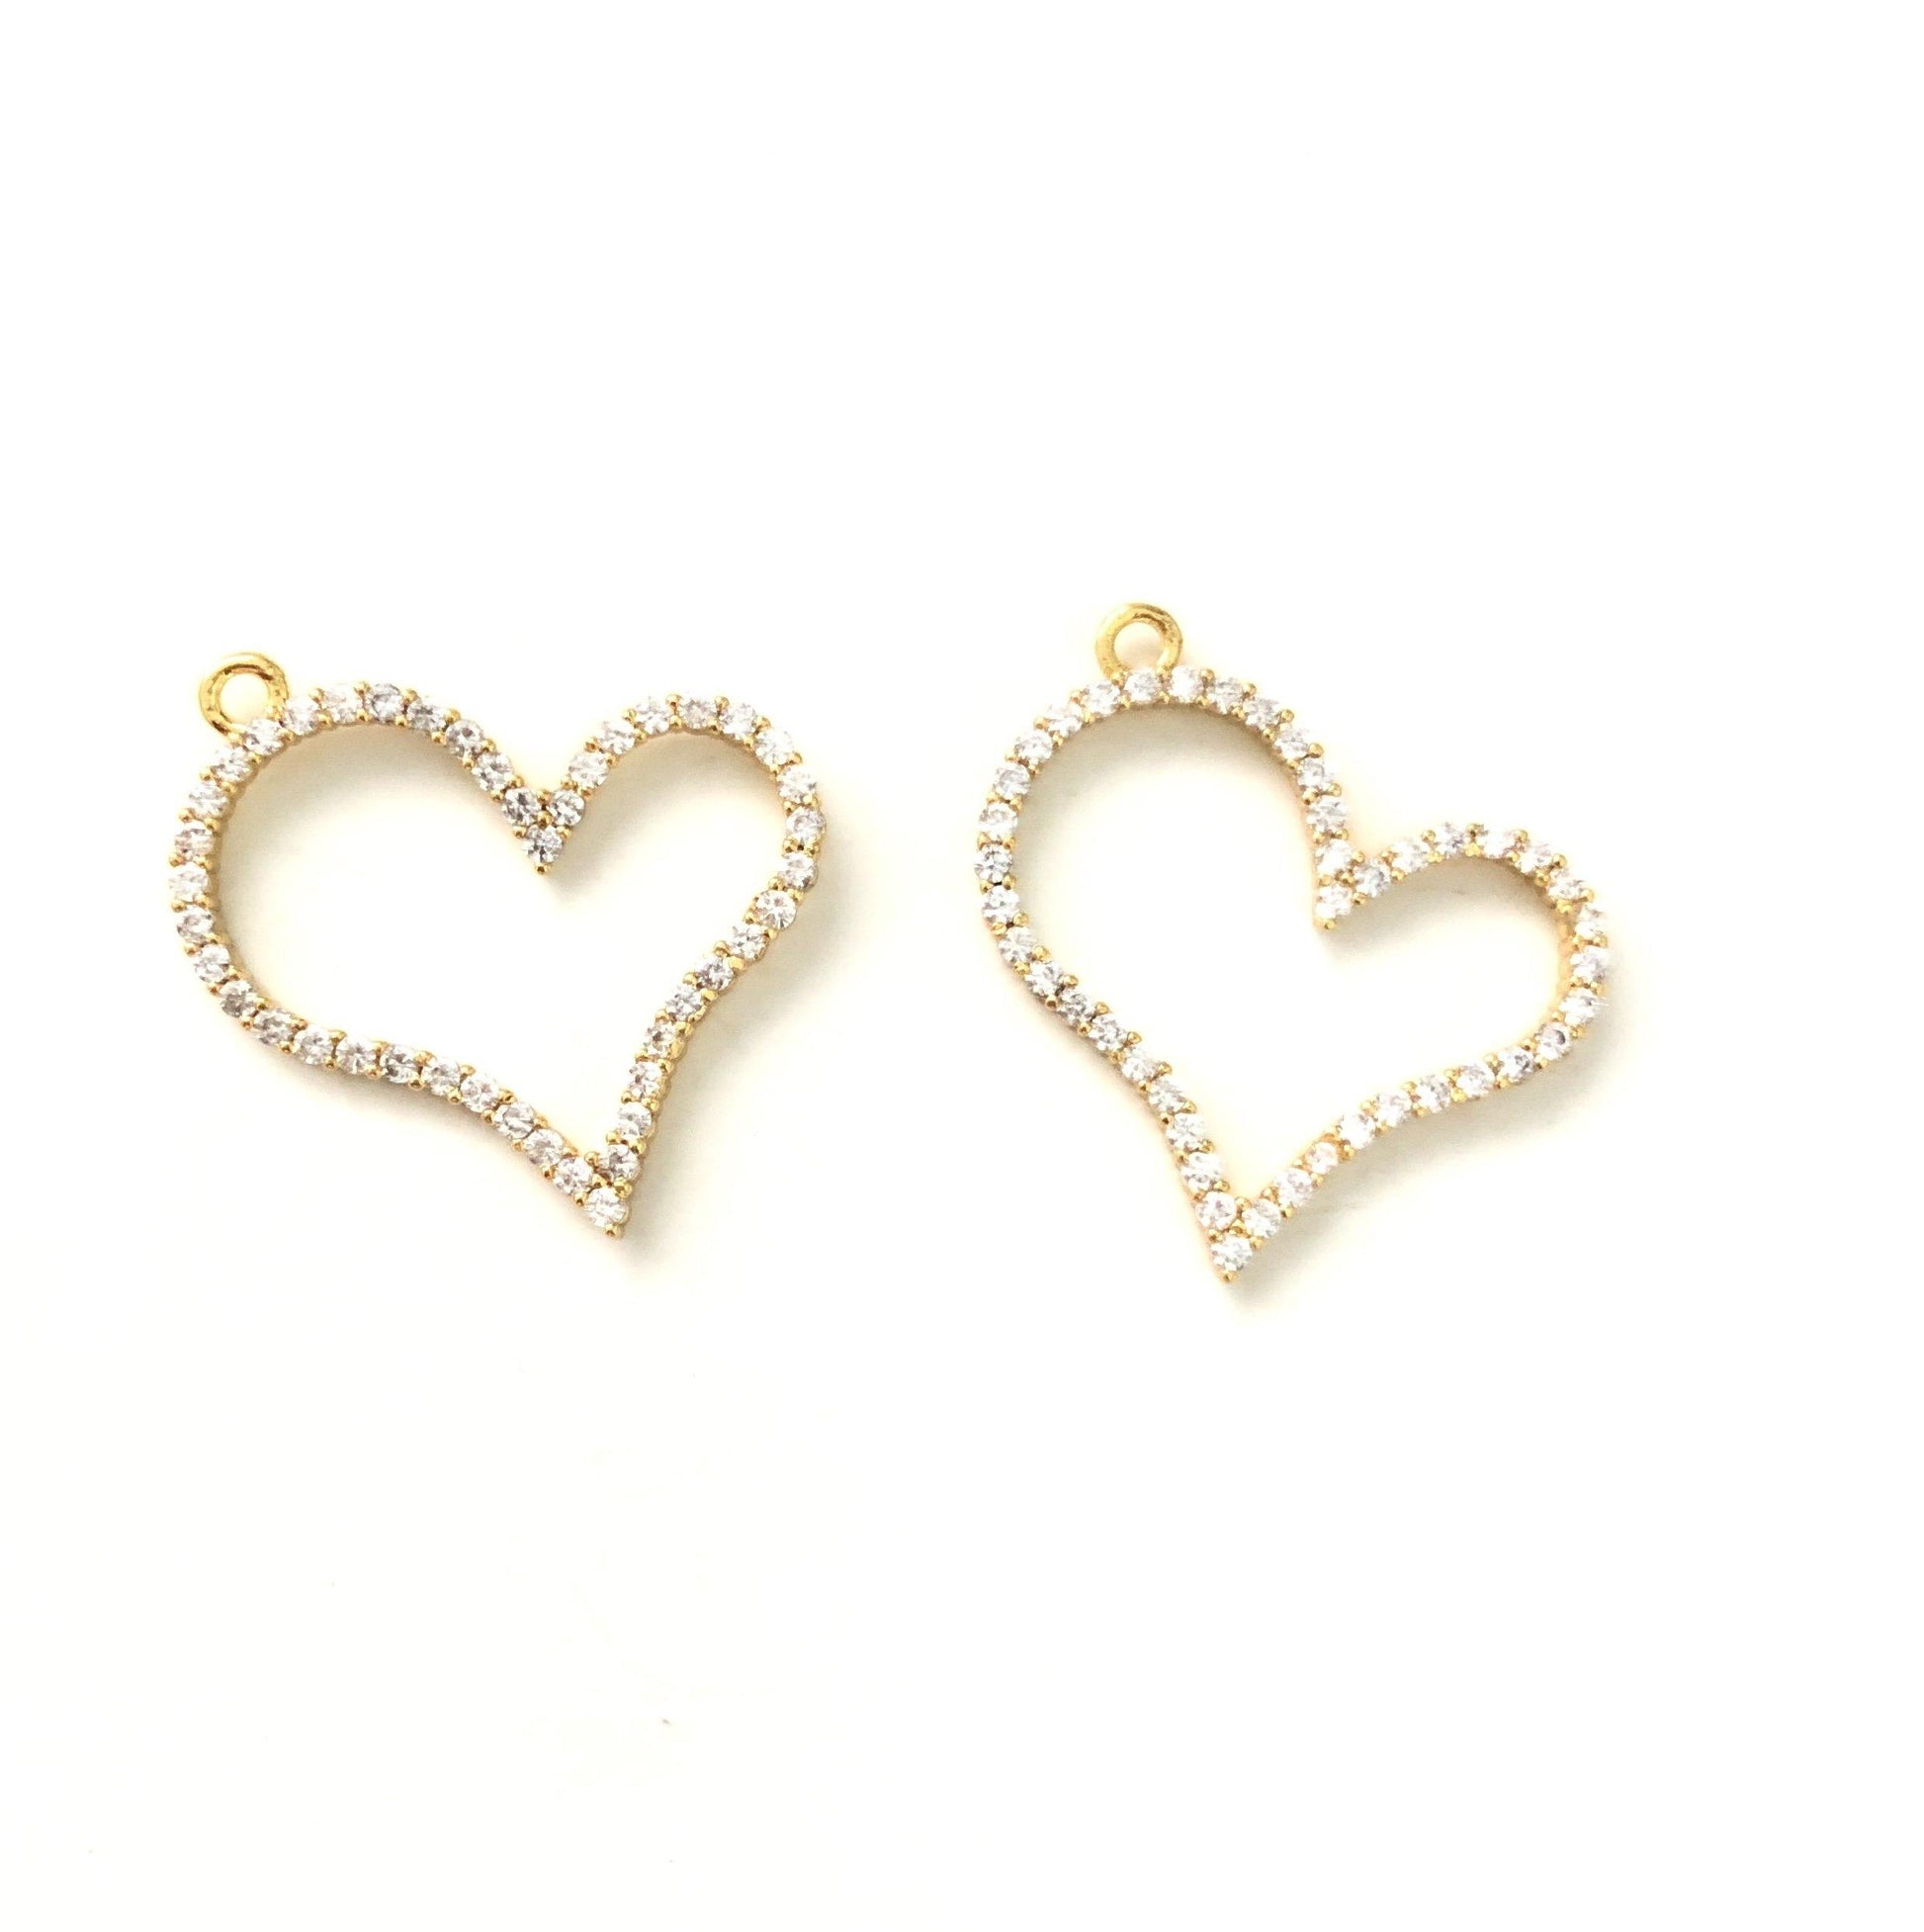 10pcs/lot 25*25mm CZ Paved Heart Charms Gold CZ Paved Charms Hearts On Sale Charms Beads Beyond